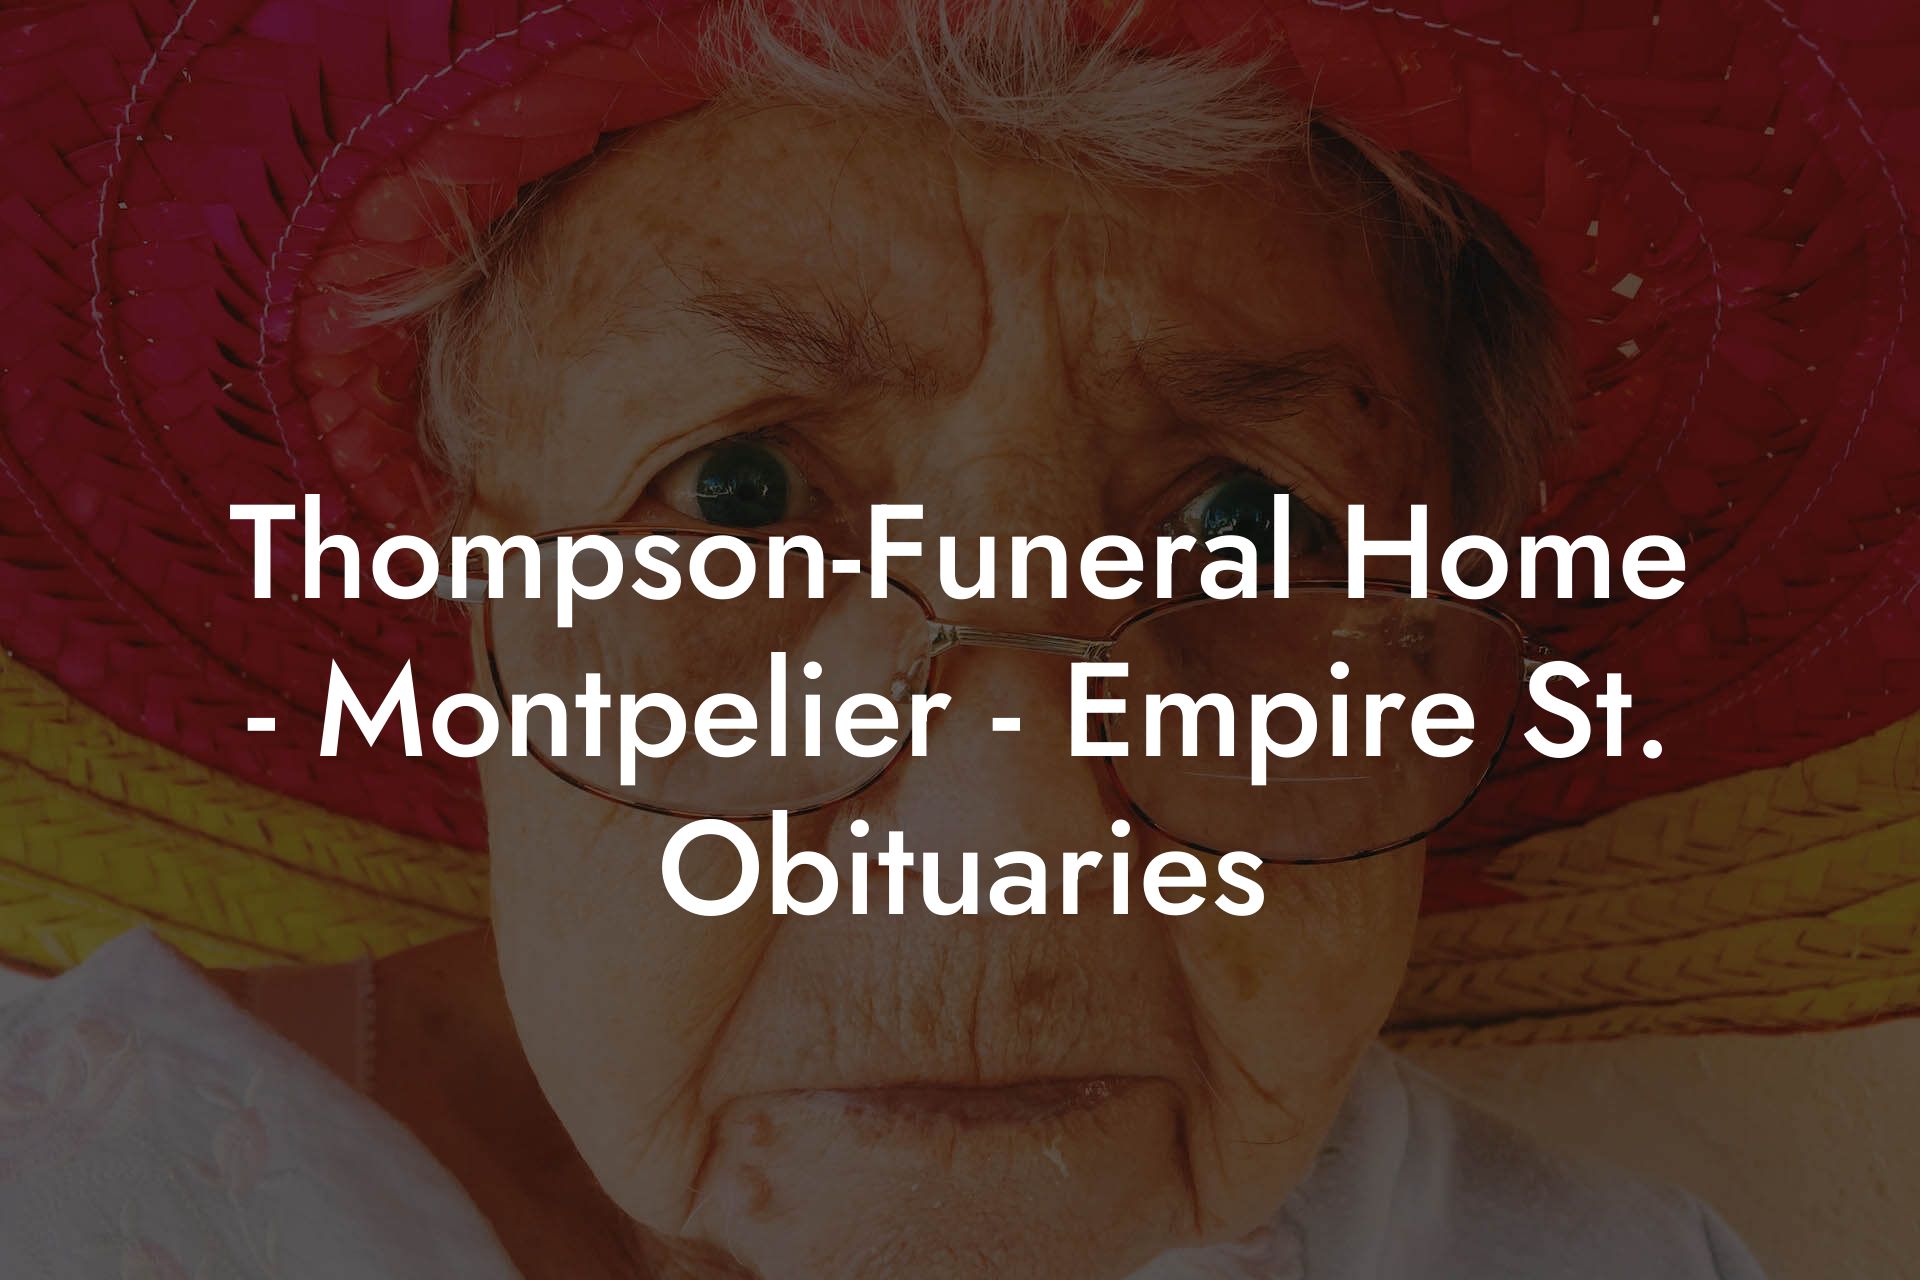 Thompson-Funeral Home - Montpelier - Empire St. Obituaries